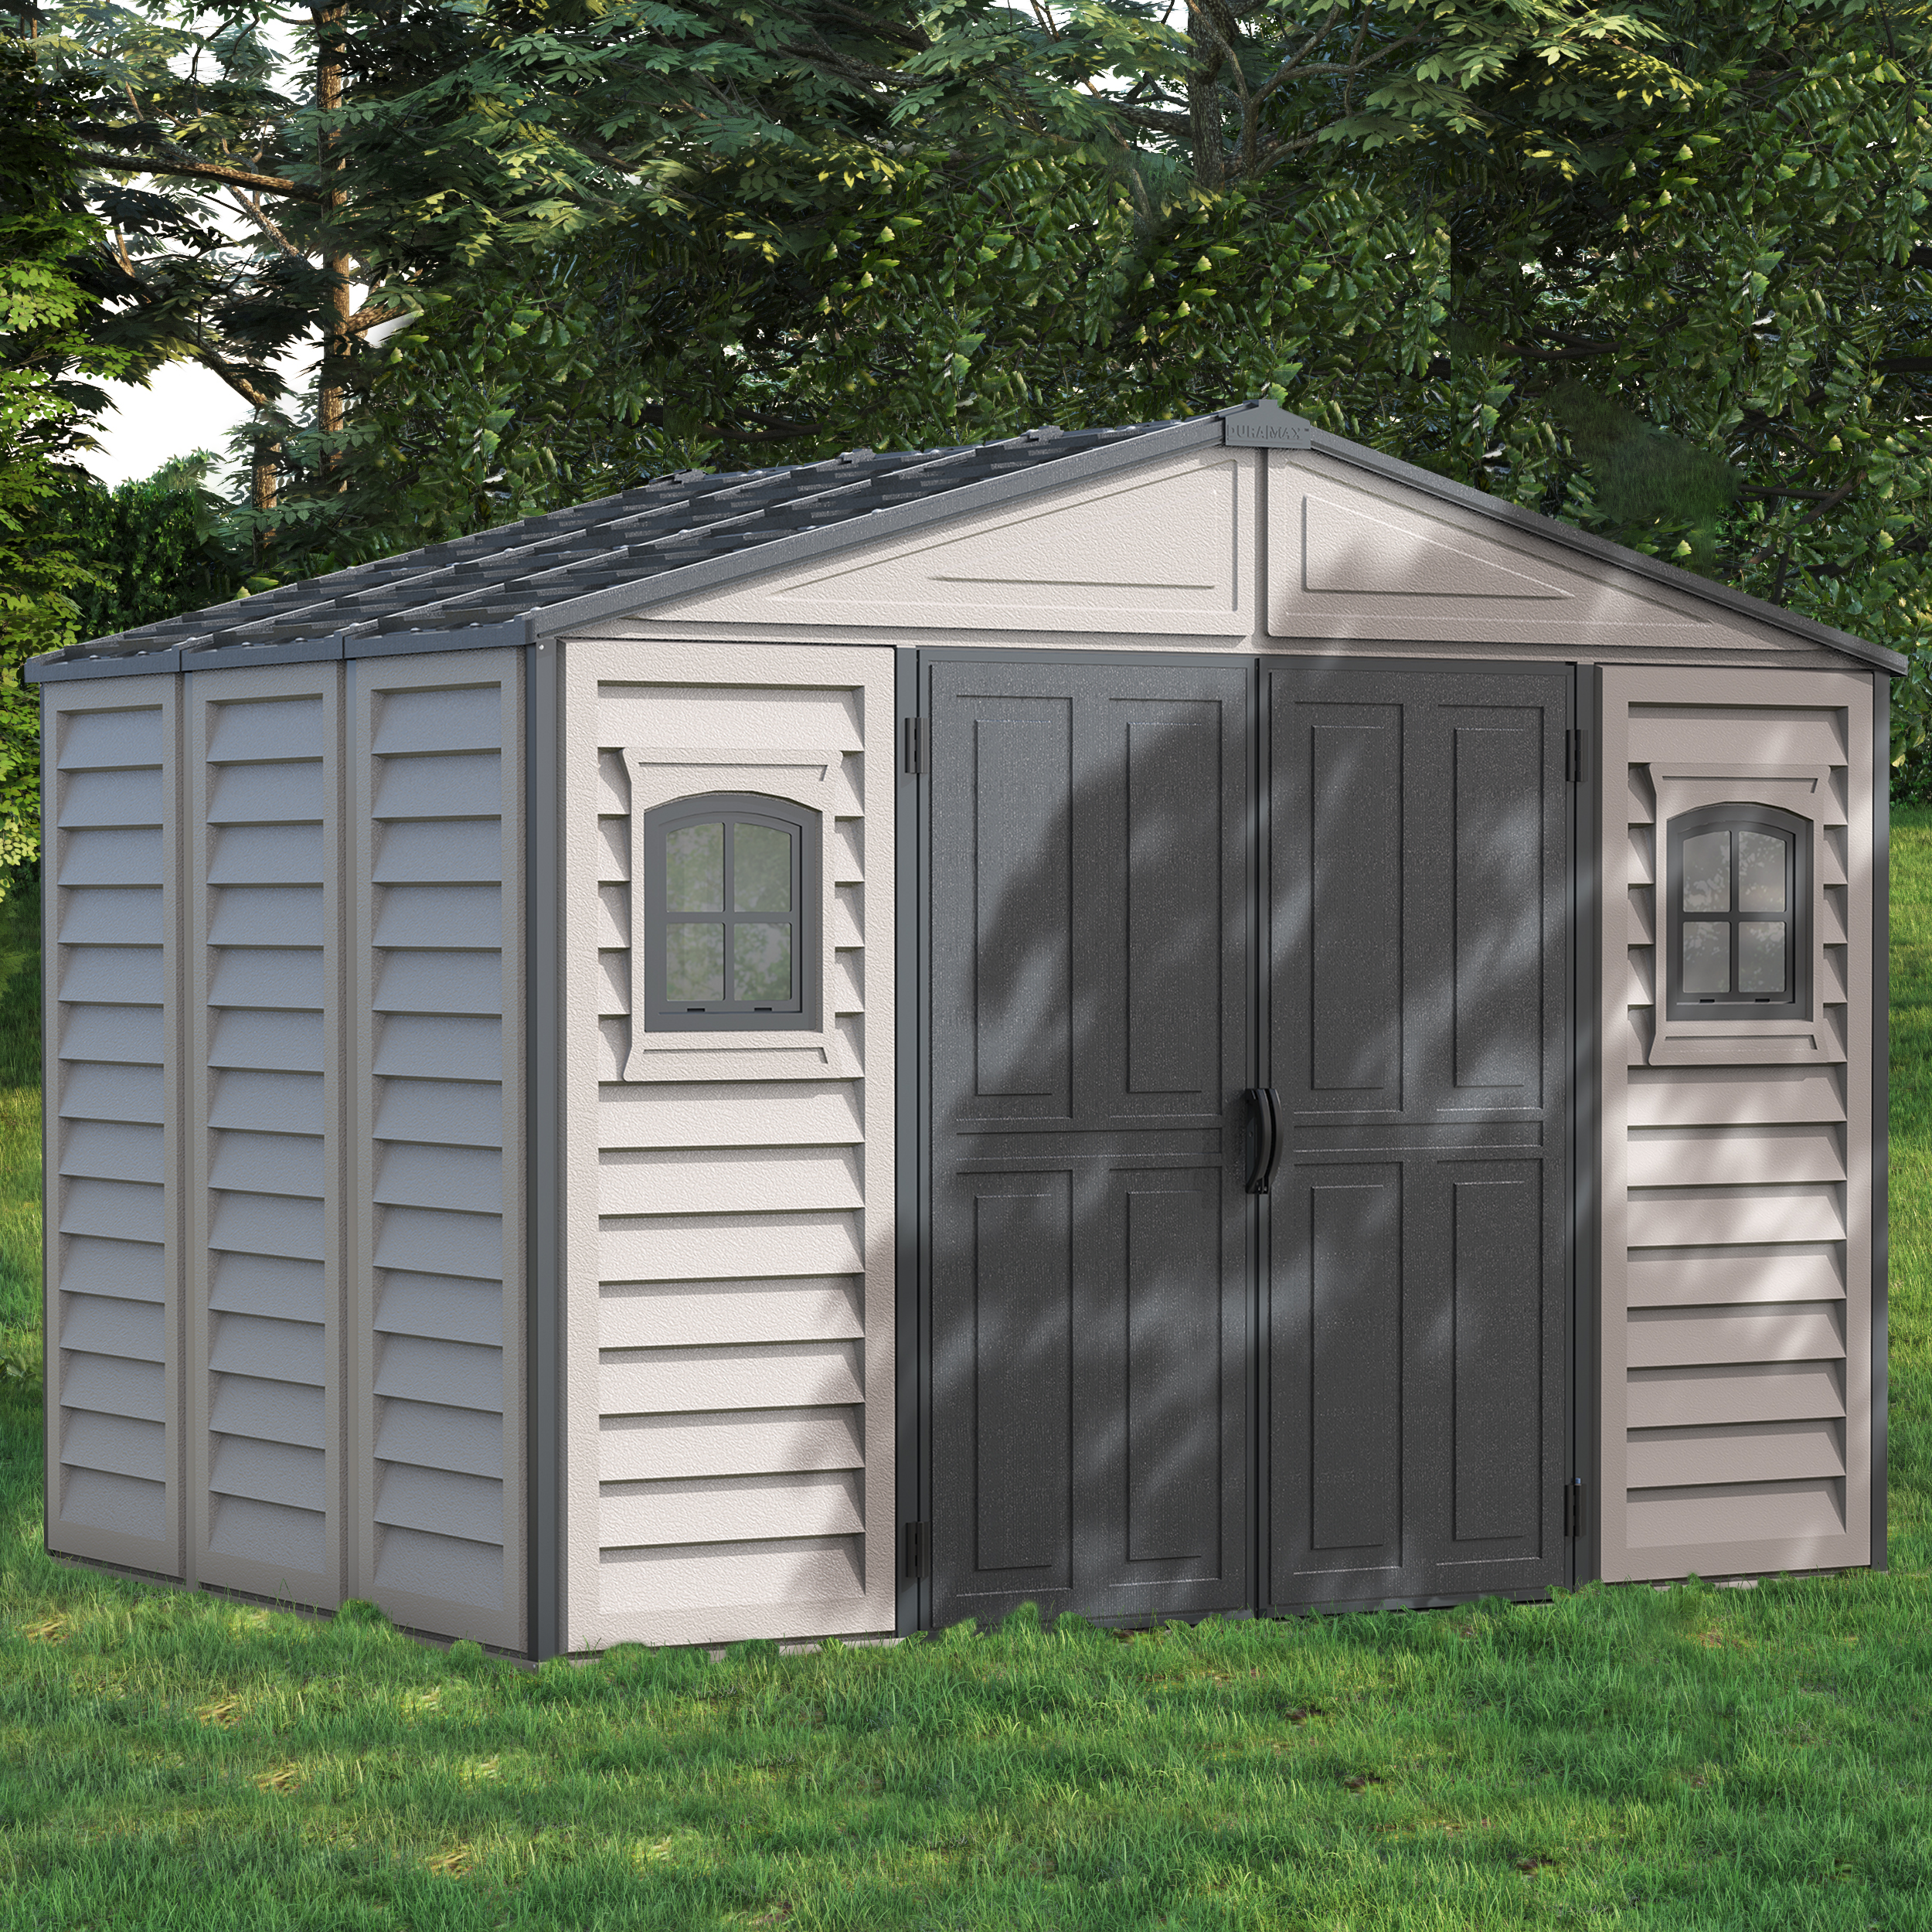 BillyOh WoodBridge II Plus 10x8ft Apex Plastic Shed with Foundation Kit - 10x8ft